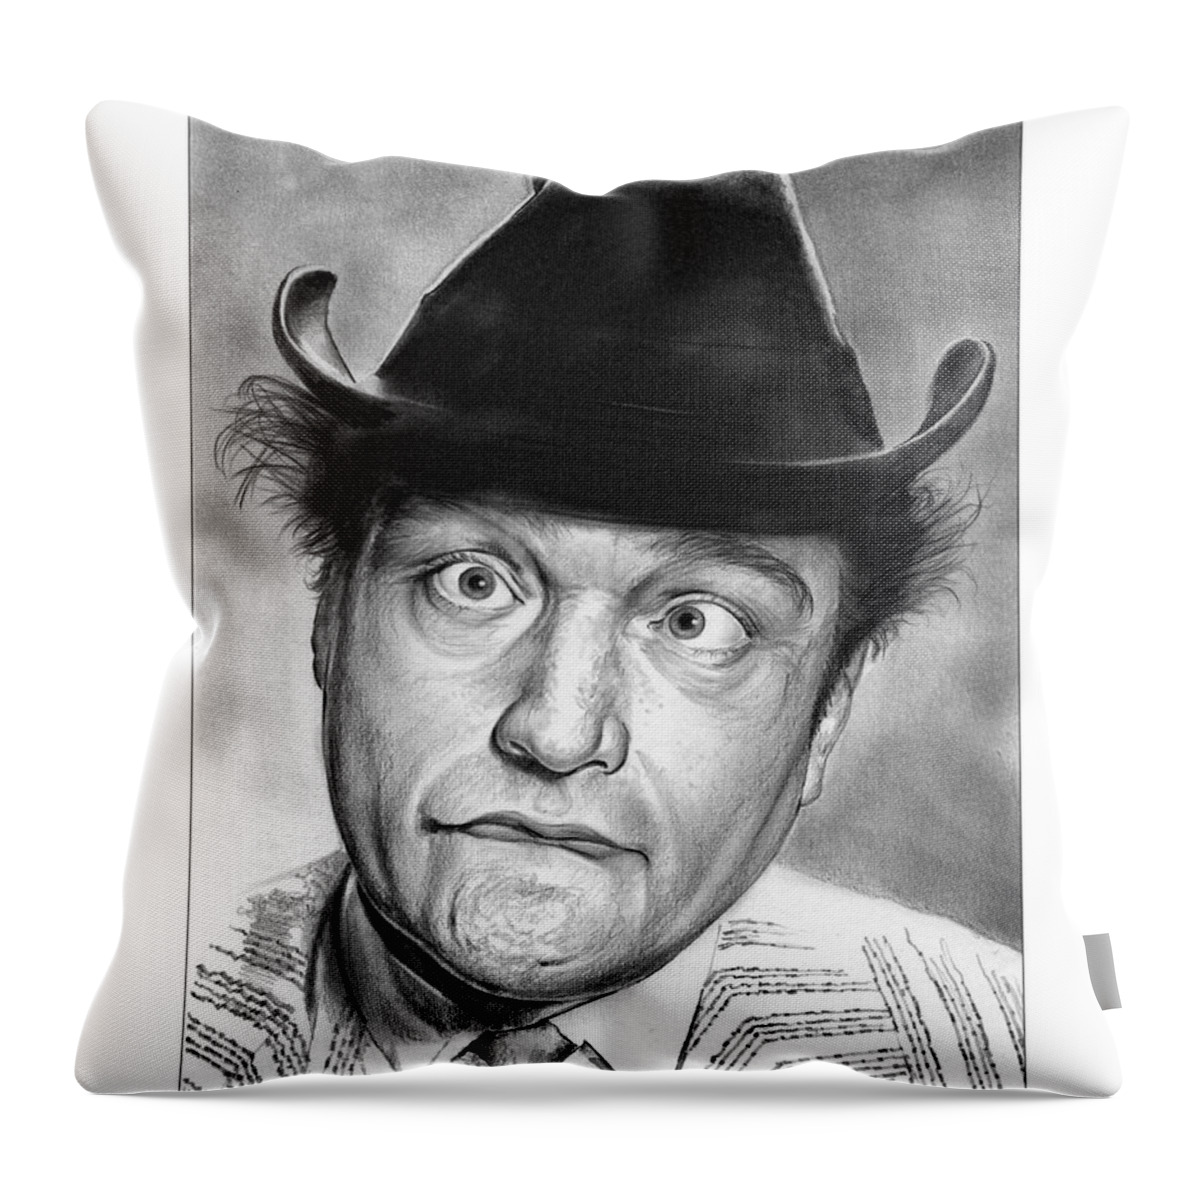 Red Skelton Throw Pillow featuring the drawing Red Skelton by Greg Joens